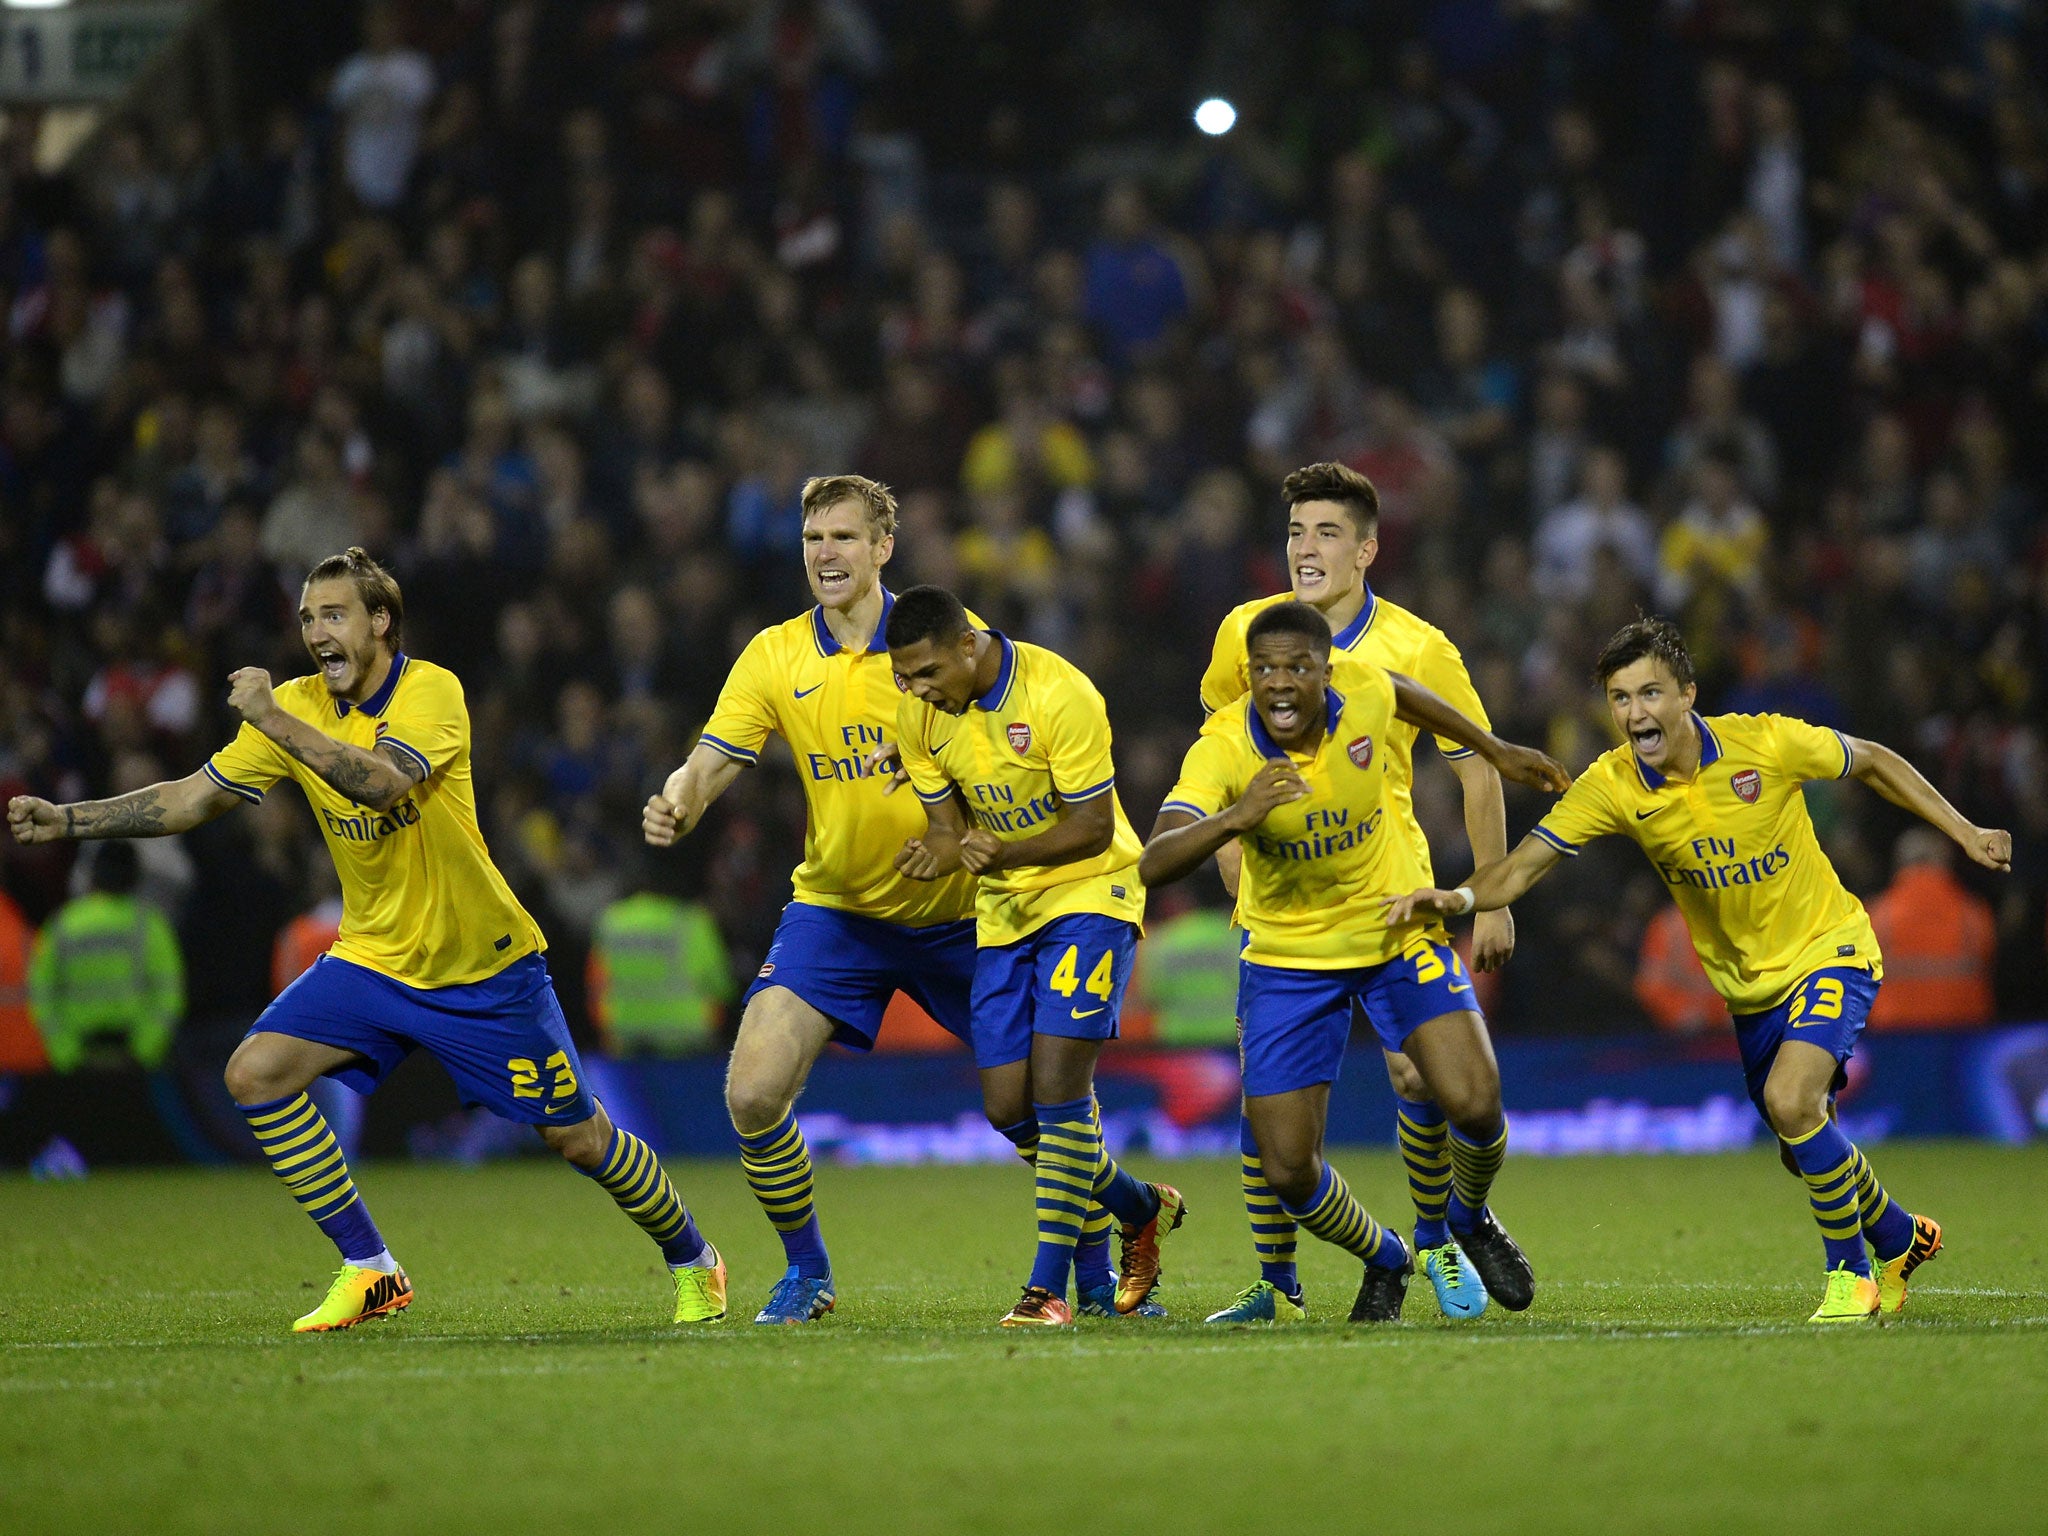 Arsenal’s young side celebrate their penalties win over West Bromwich Albion